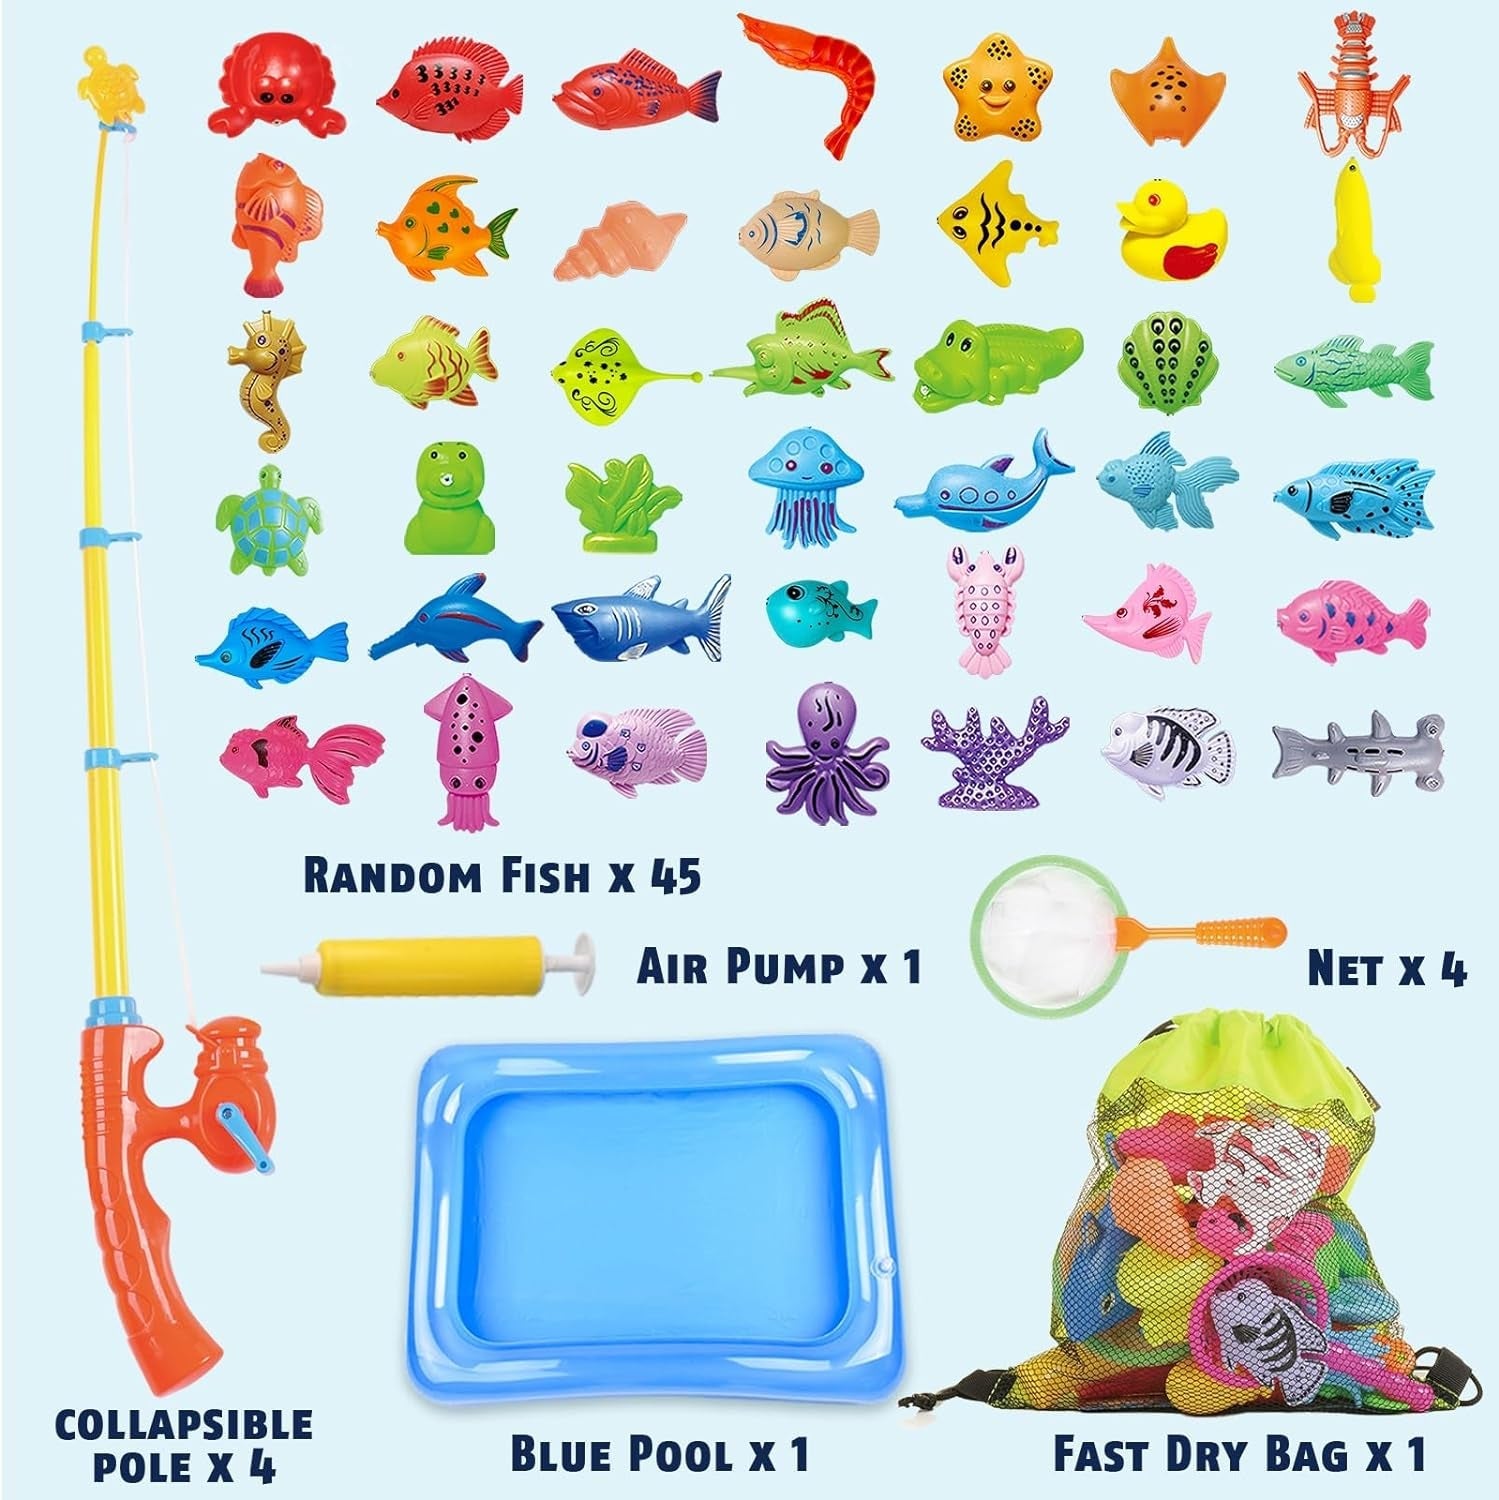 Cozybomb™ Kids Pool Fishing Toys Games | Summer Magnetic Floating Toy Magnet Pole Rod Fish Net Water Table Bathtub Bath Game, Learning Education for Age 3 4 5 Boys Girls Toddlers Carnival Party Favors